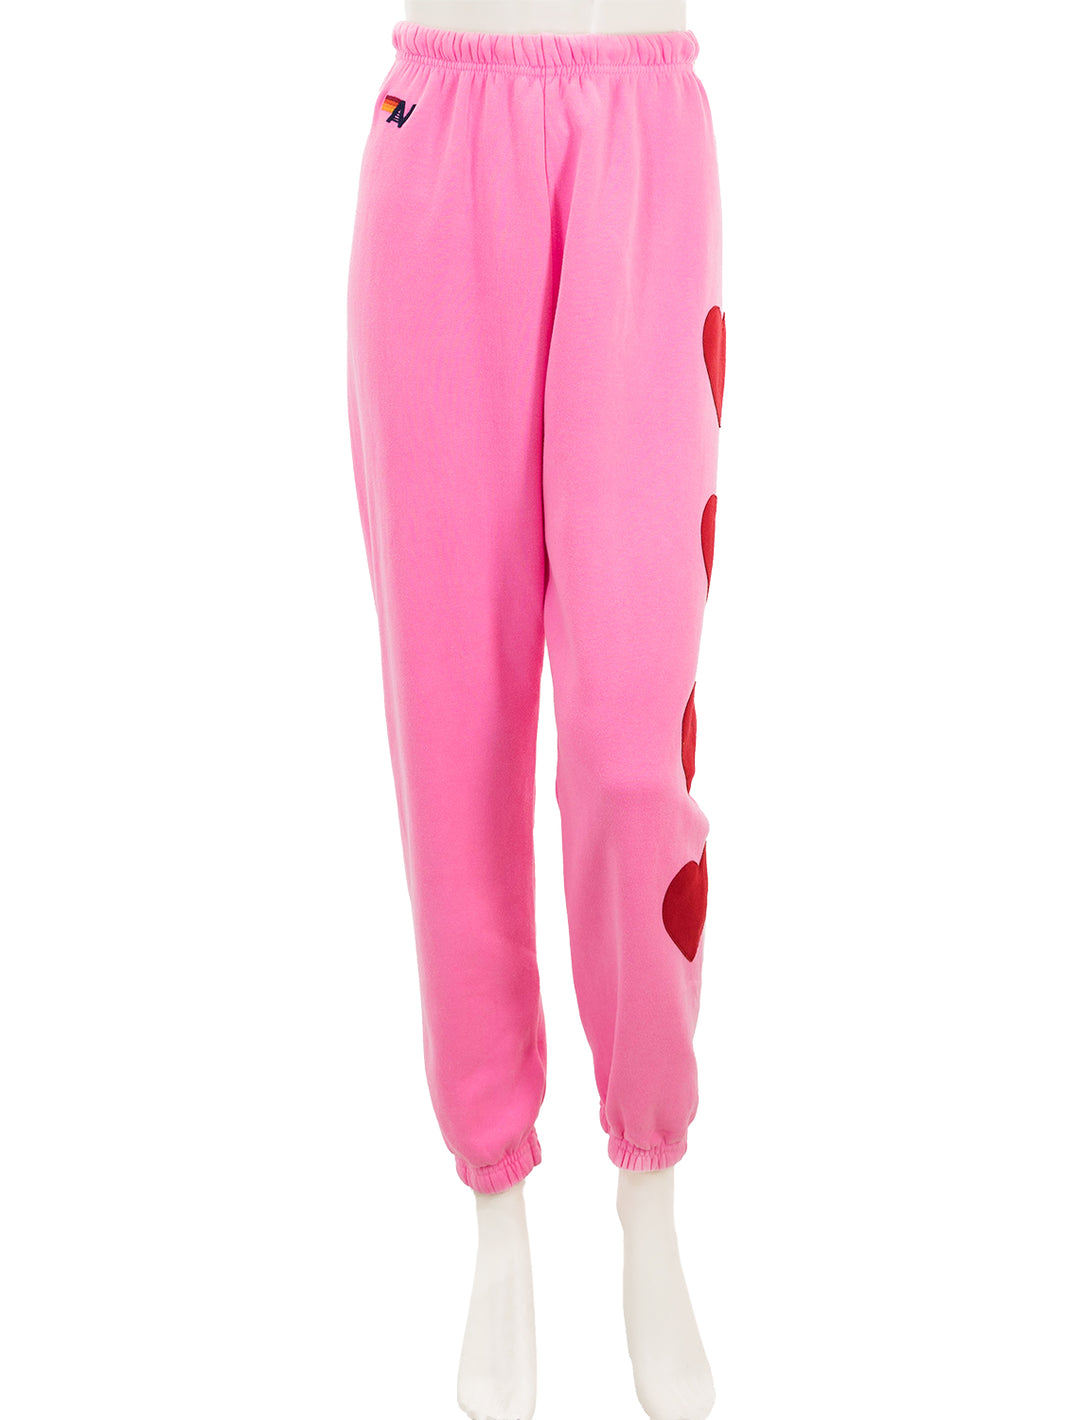 Front view of Aviator Nation's heart stitch four sweatpants in pink.